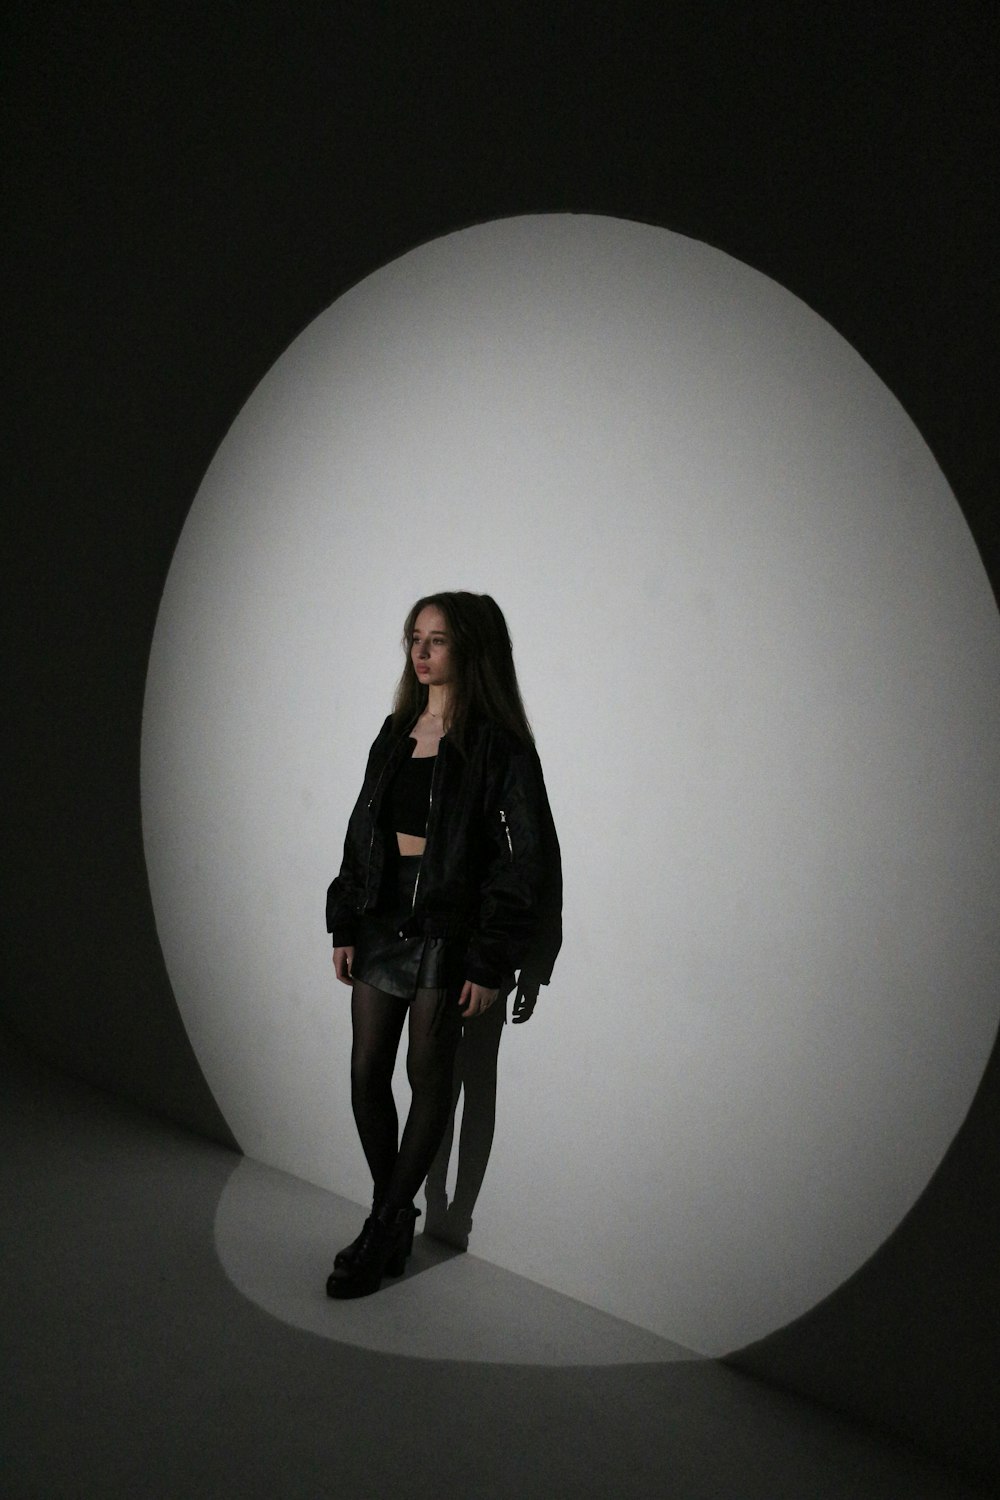 a woman standing in front of a white ball